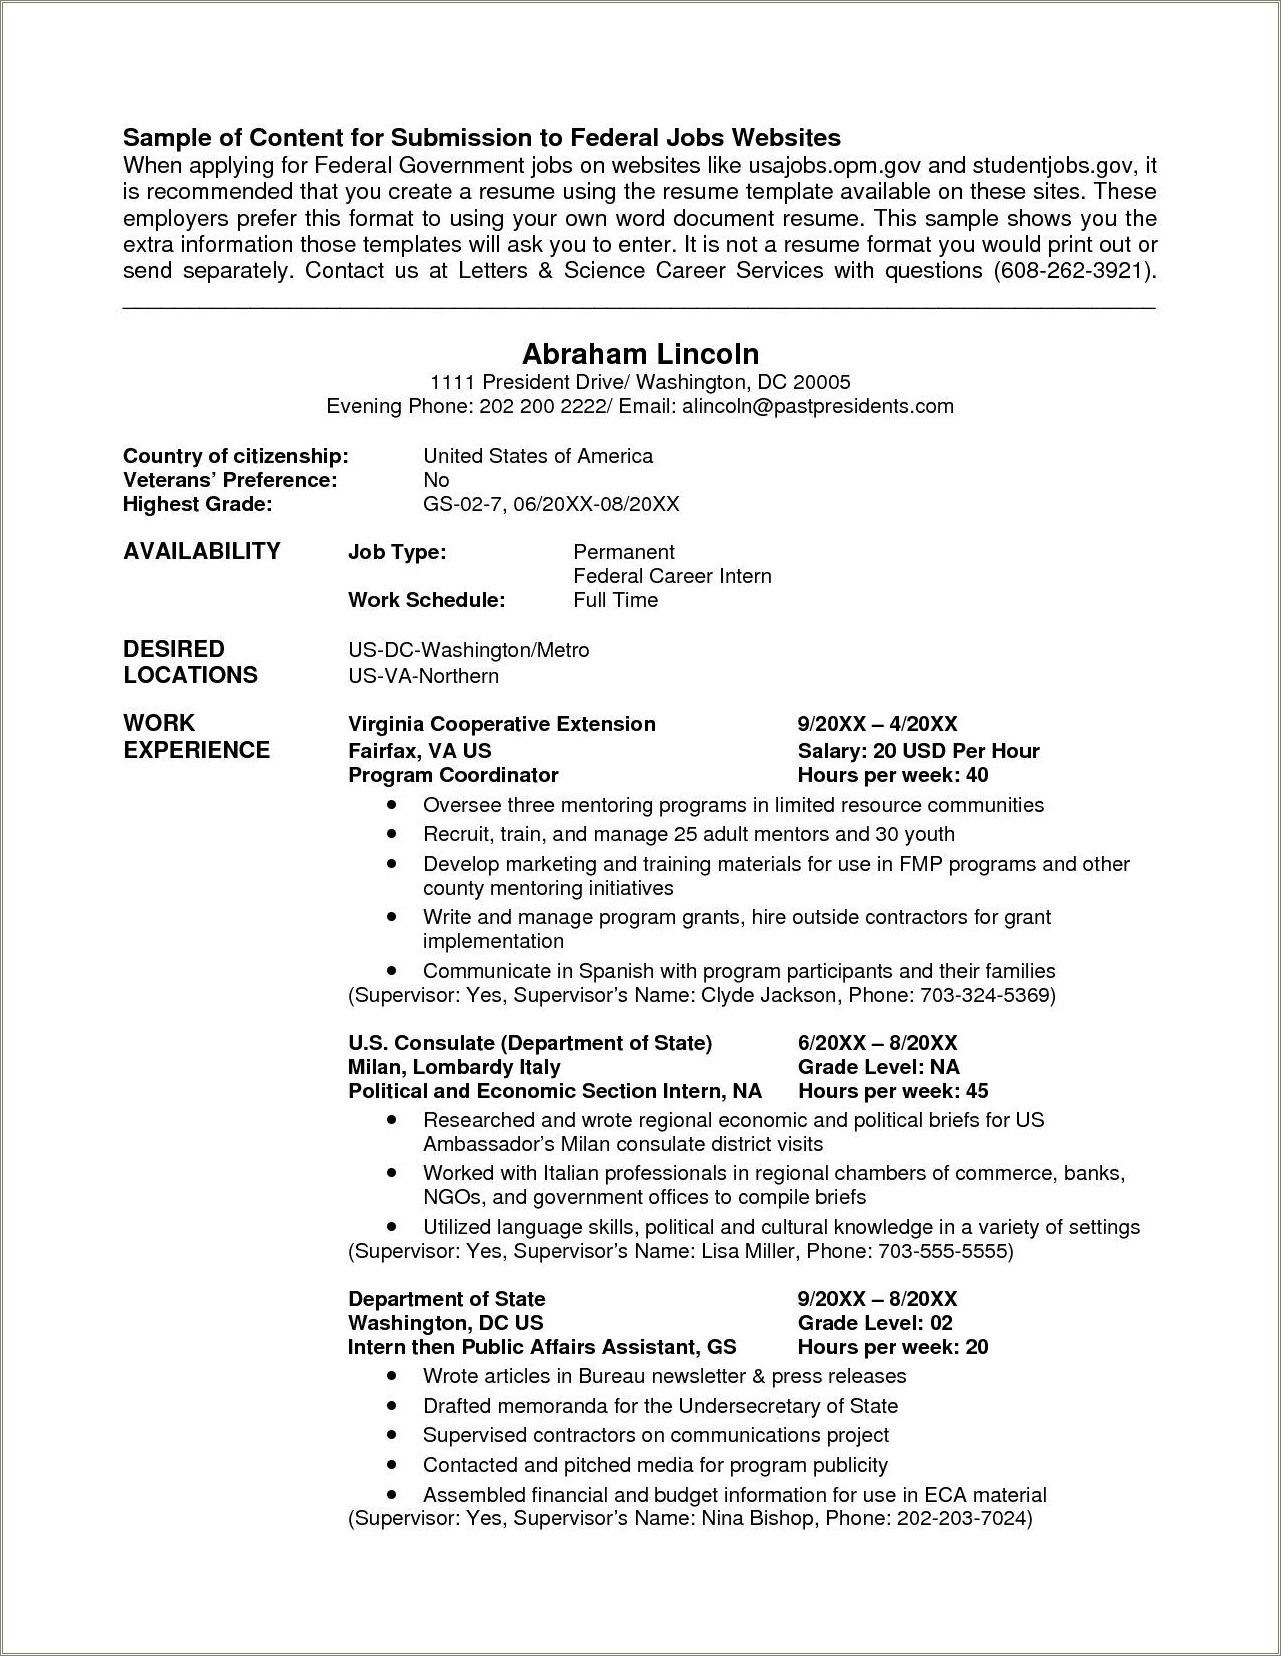 Advice For Filling Out Usa Jobs Resume